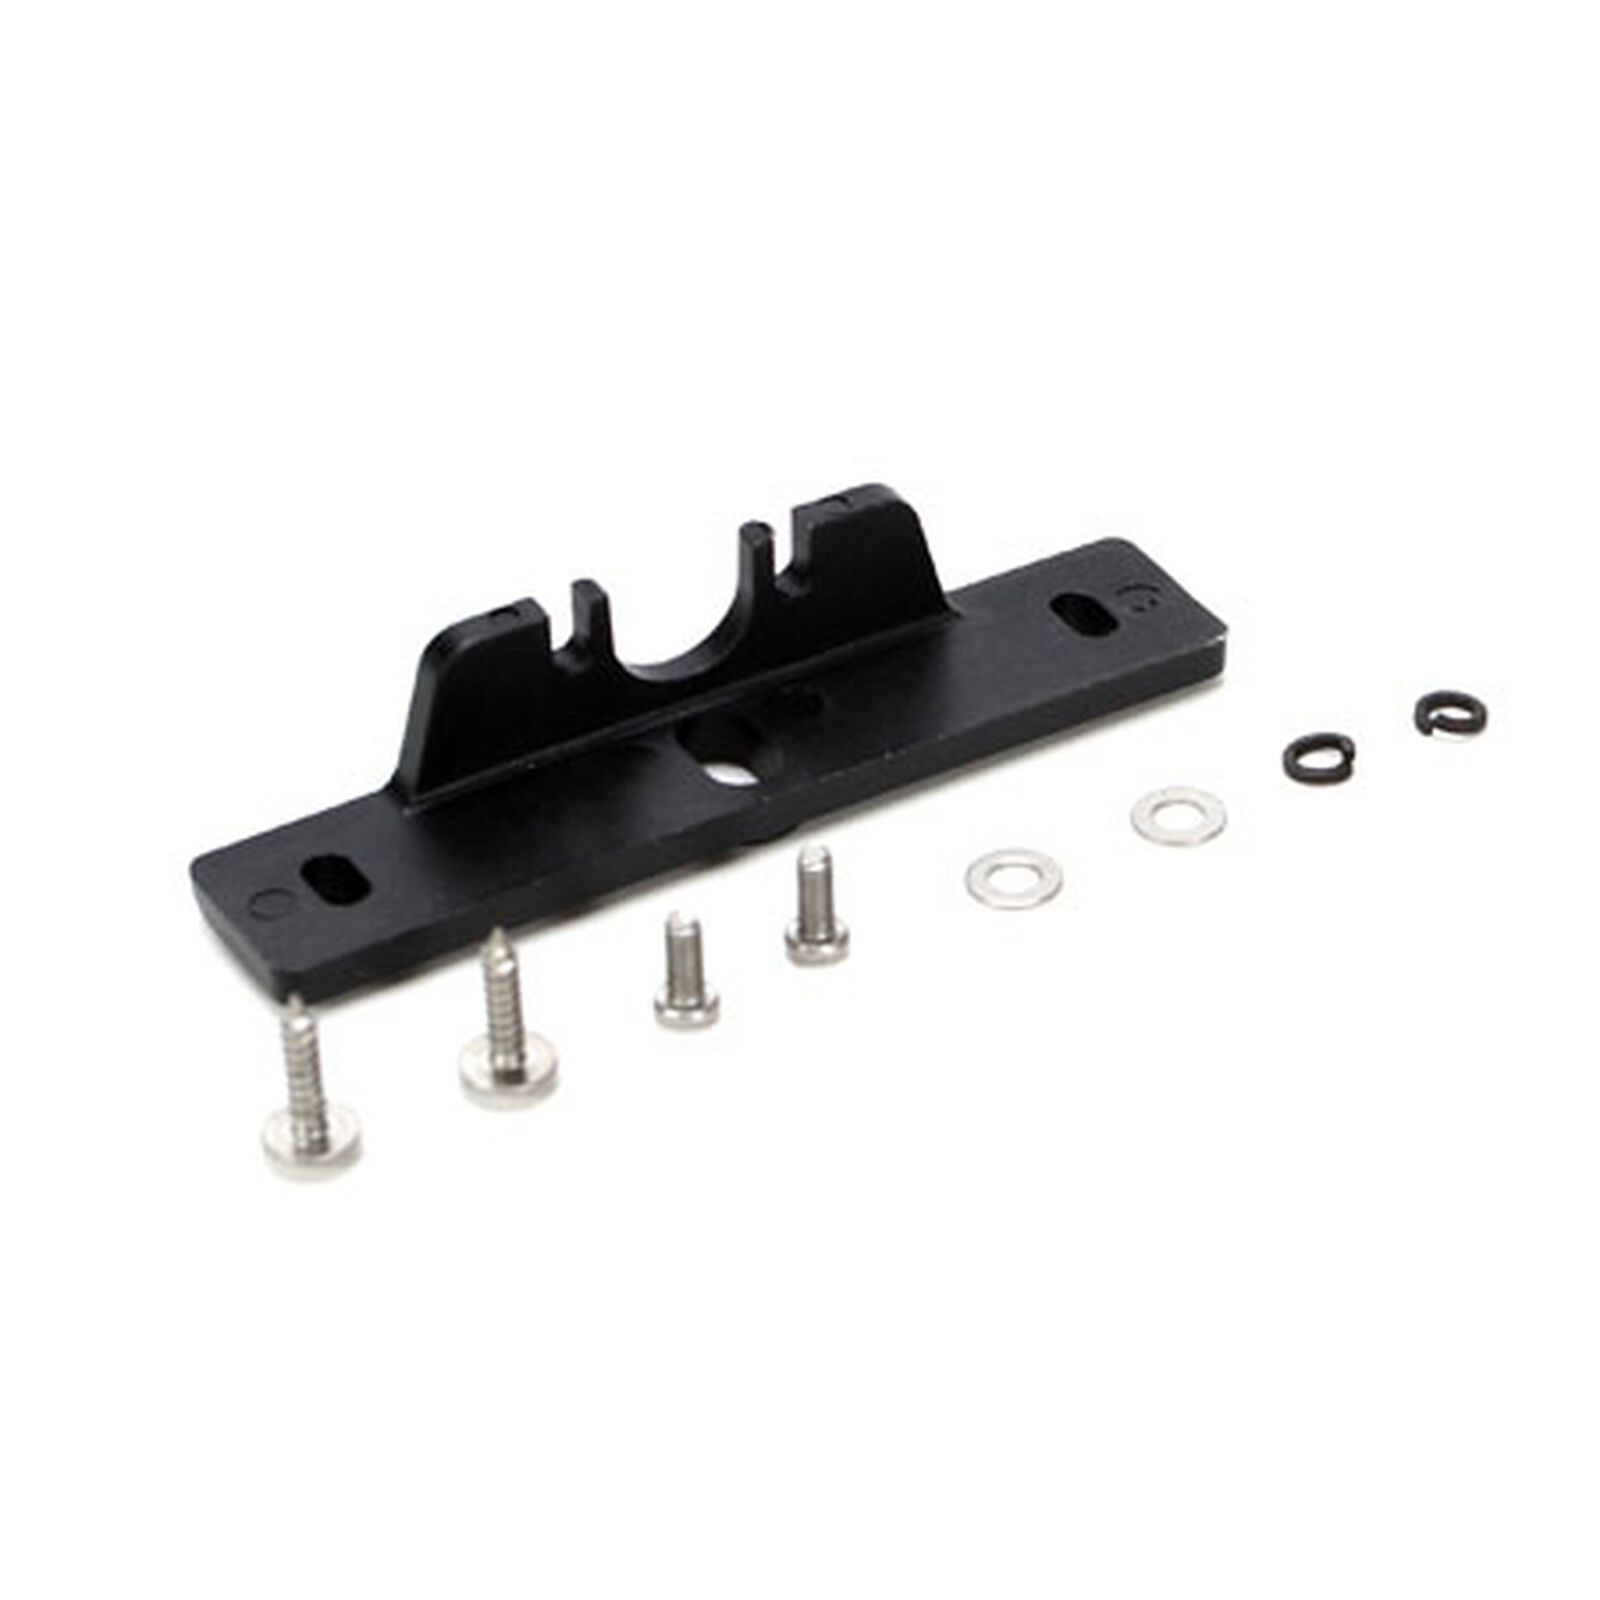 Motor Mount With Fasteners: MG17, IM17